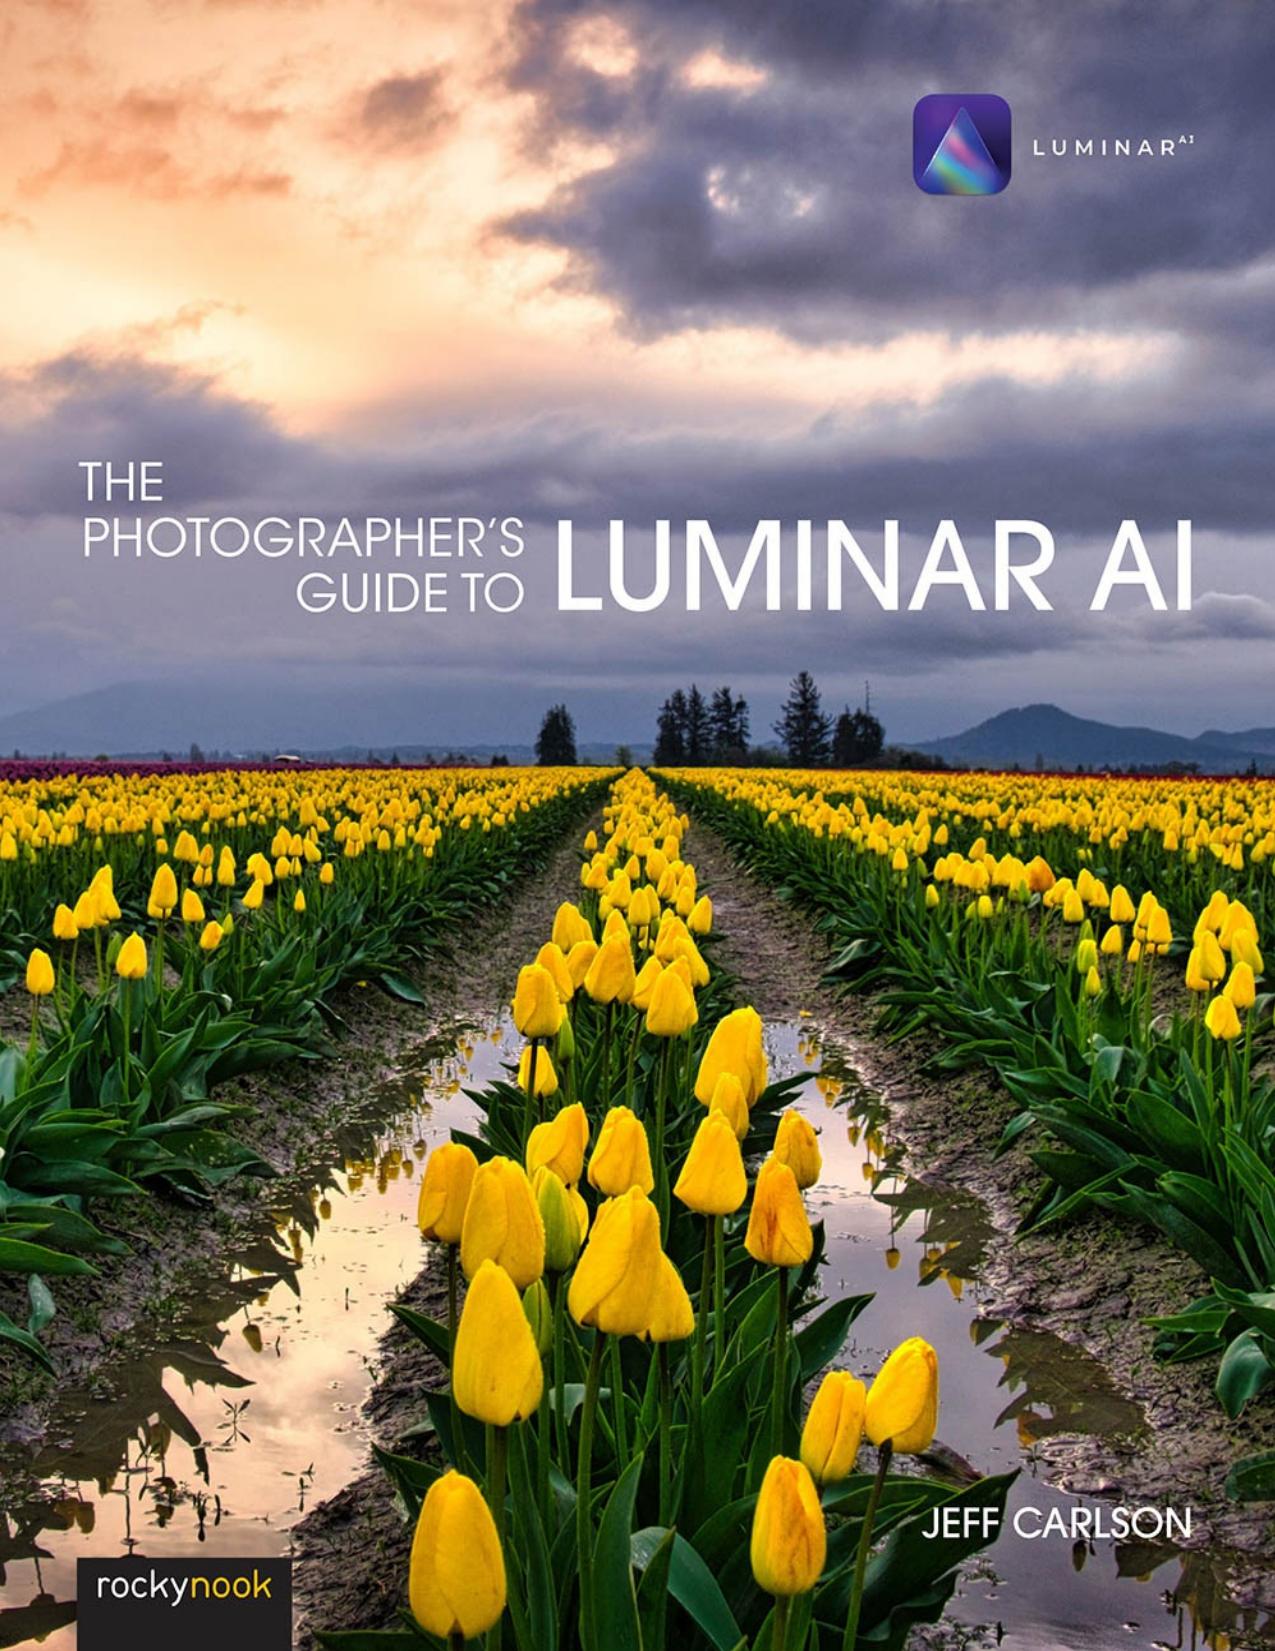 The Photographer's Guide to Luminar AI by Jeff Carlson